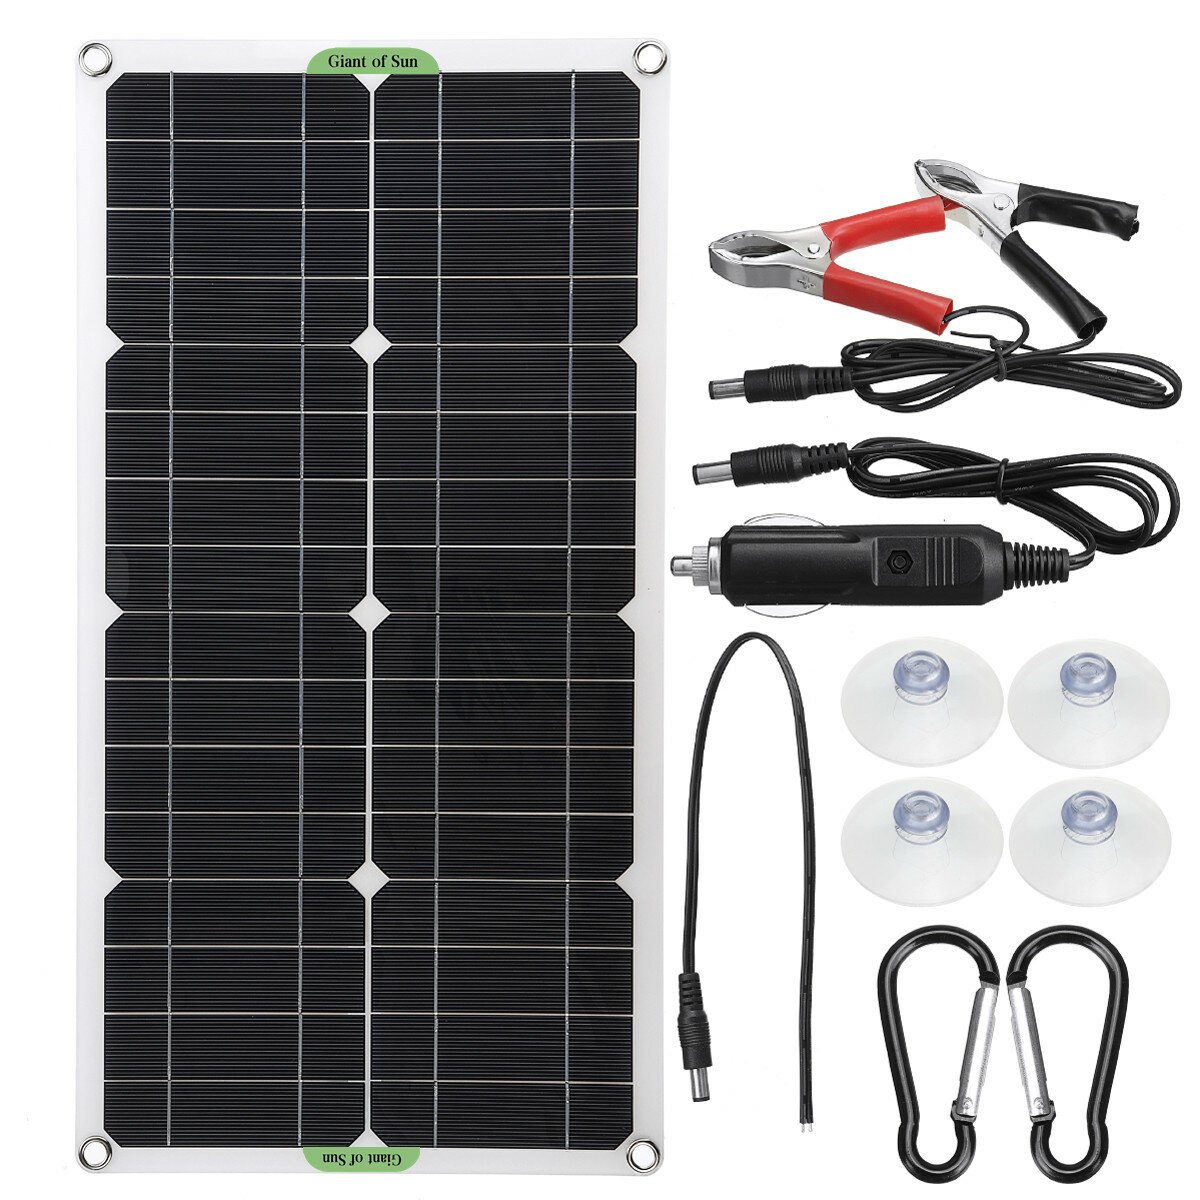 

12V 30W Solar Panel Kit Complete 10A 30A 50A 60A Controller RV Camping Car Boat Battery Phone USB Solar Power Bank Charg